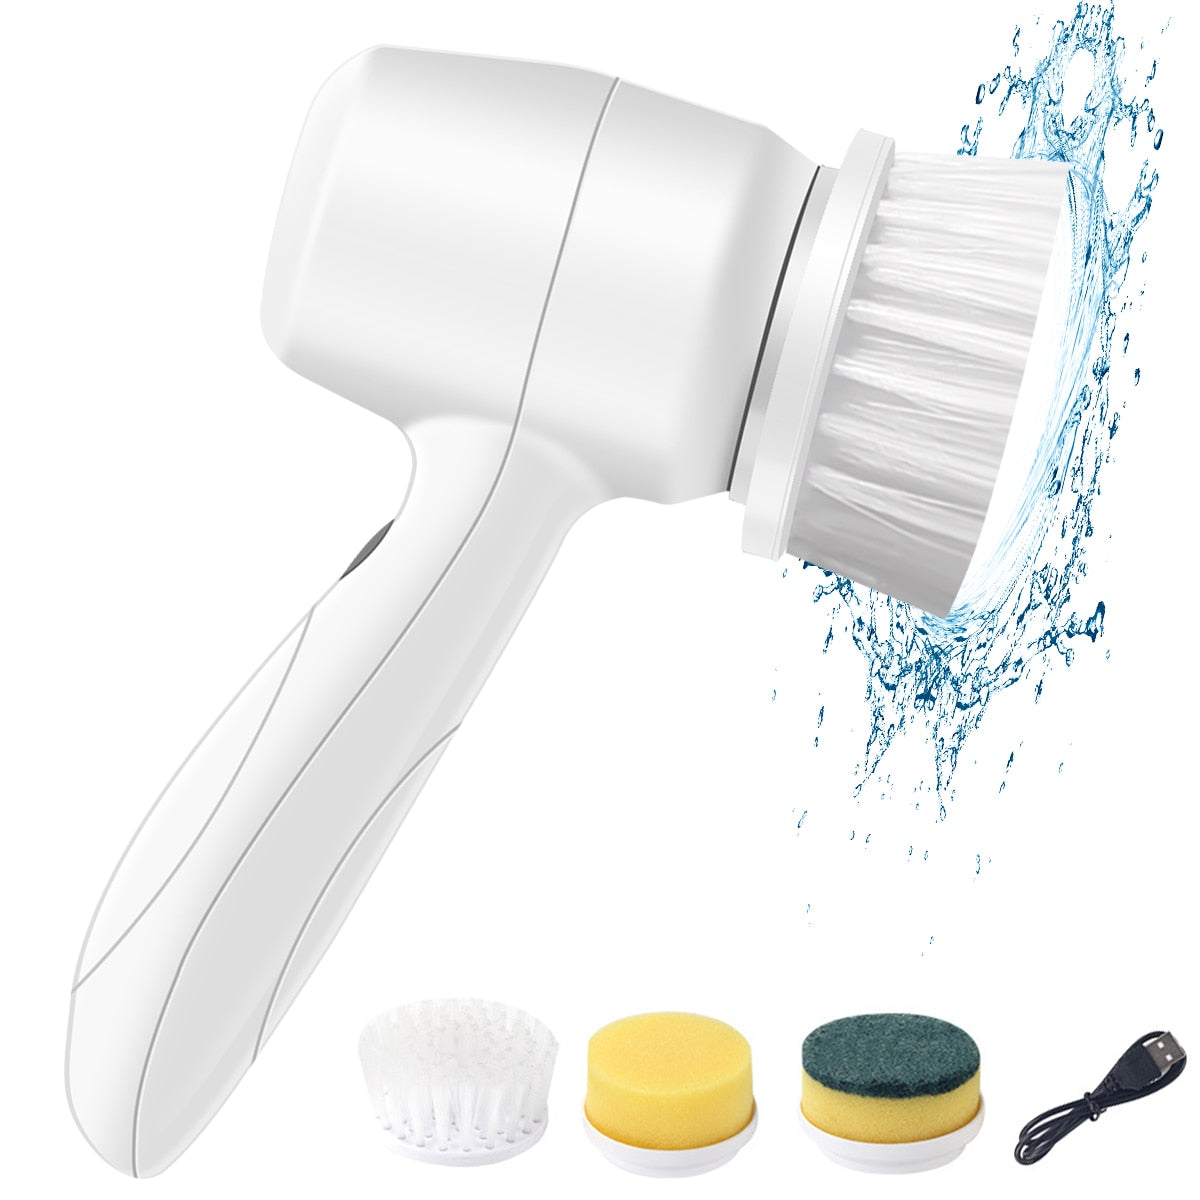 Say goodbye to back-breaking scrubbing and hello to effortless cleaning with this innovative device. Powered by a1 rechargeable battery, this cleaning brush packs a punch with its high-speed motor that delivers up to 300 rotations per minute. Whether it's stubborn grime in your bathroom or tough stains in your kitchen, this powerful brush will leave your surfaces sparkling clean thanks to it's 3 cleaning brushes and the 360° rotation.